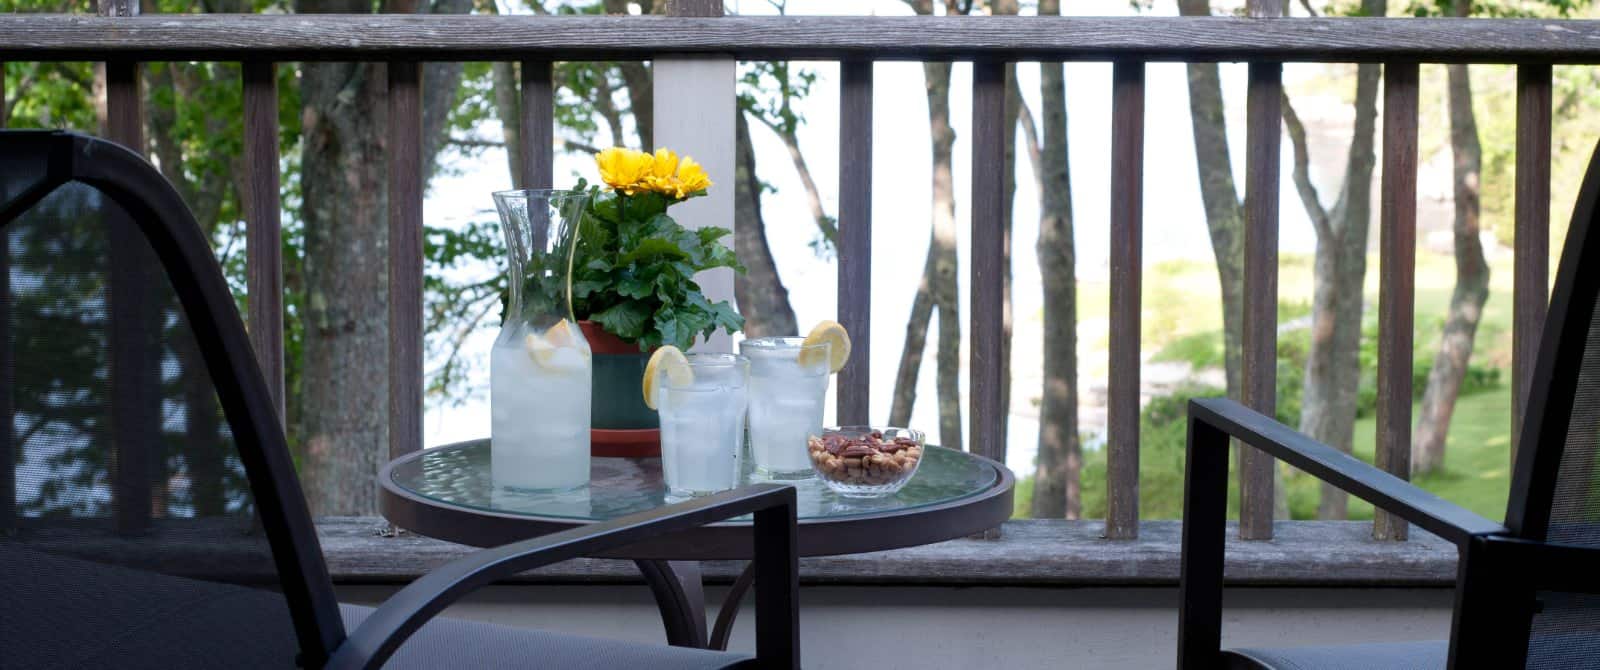 Small glass table holds a carafe of lemonade and two glasses with a bowl of nuts, next to two chairs on a patio.